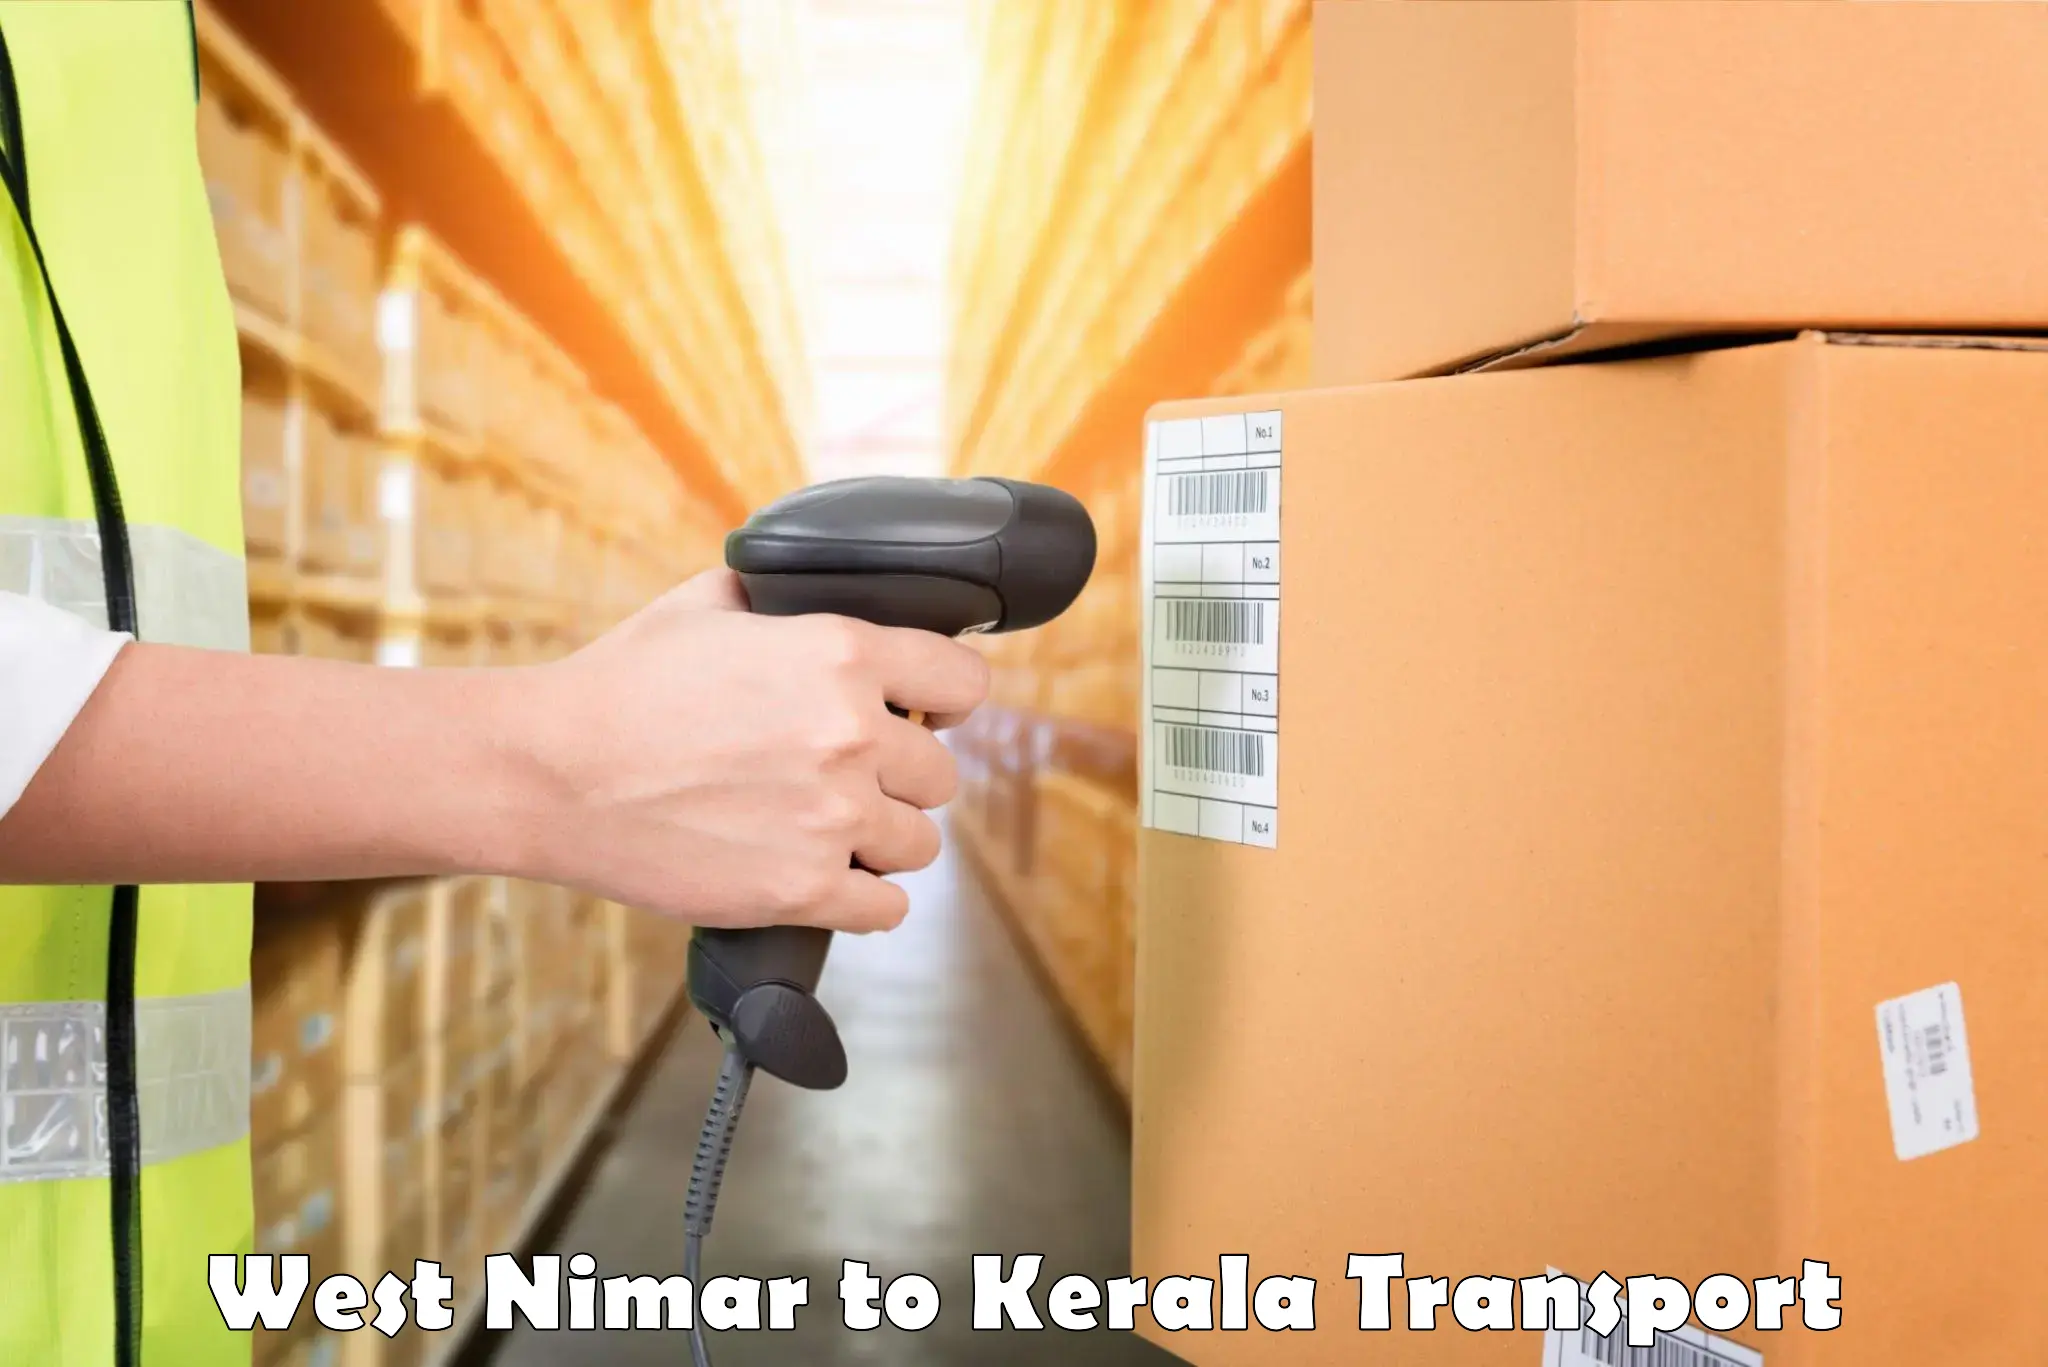 Daily parcel service transport West Nimar to Parippally